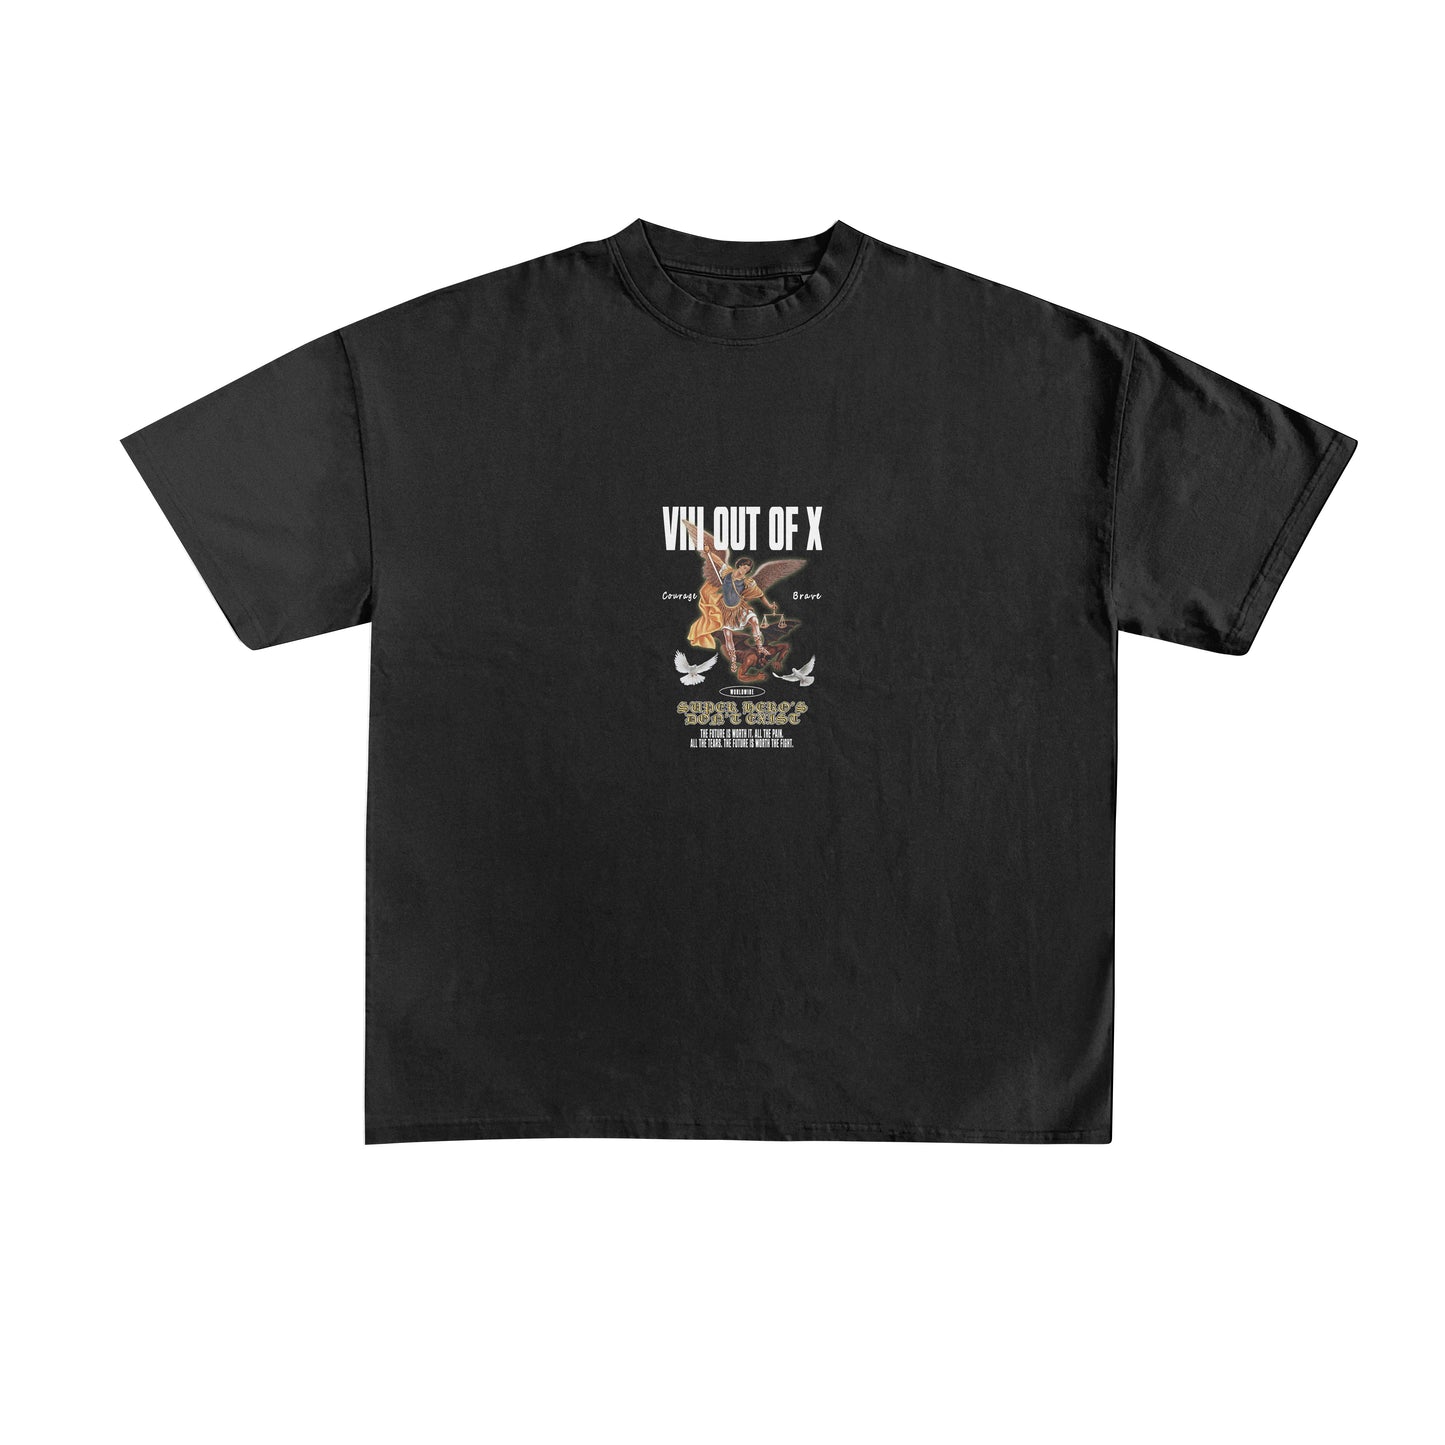 *PRE-ORDER* VIII Out Of X "Super Heroes" T-Shirt (Black)